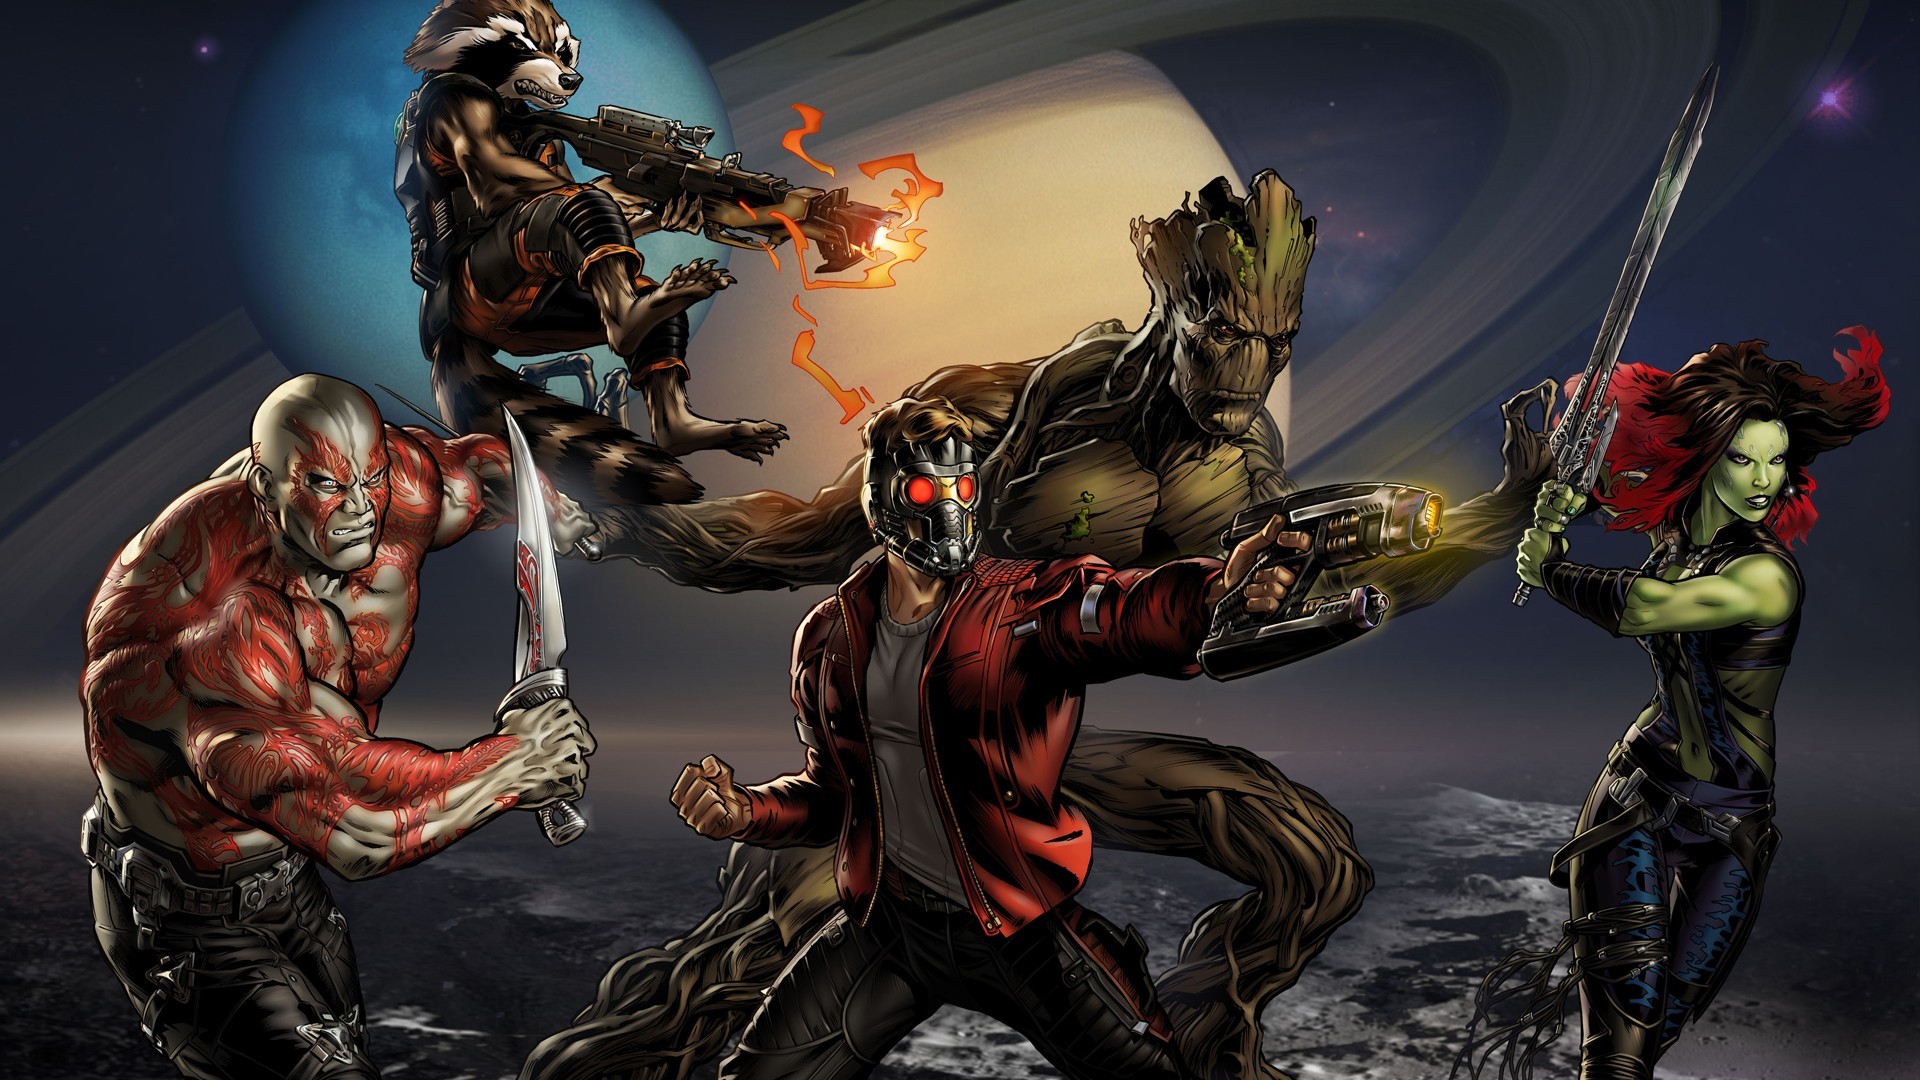 General 1920x1080 Guardians of the Galaxy Star-Lord Gamora  Rocket Raccoon Groot Drax the Destroyer Marvel Comics Marvel Cinematic Universe science fiction